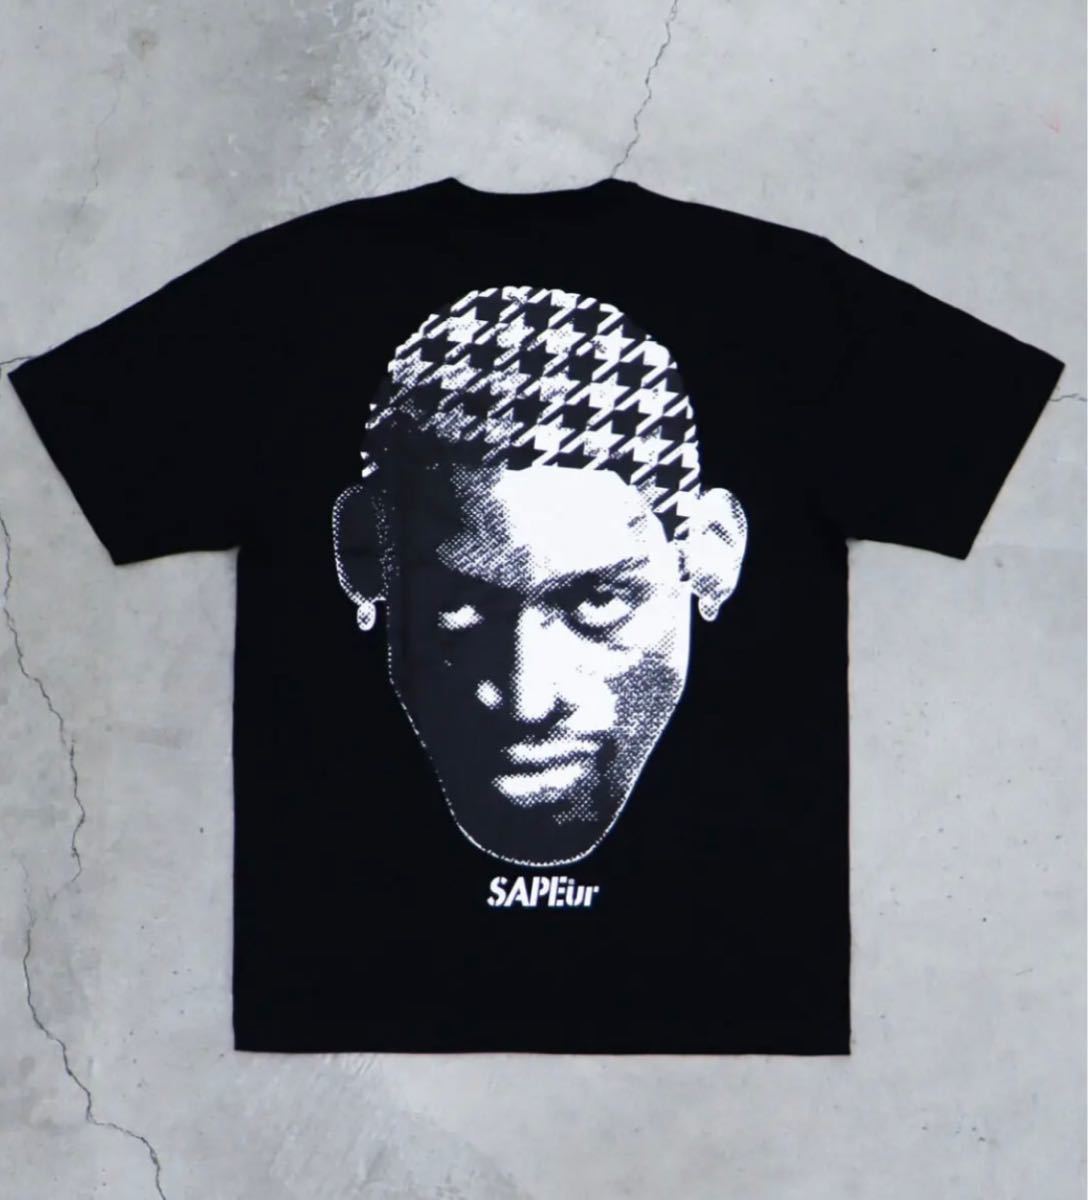 SAPEur HOUNDS TOOTH HEAD S/S TEE XLサイズ 新品未使用 サプール ロッドマン